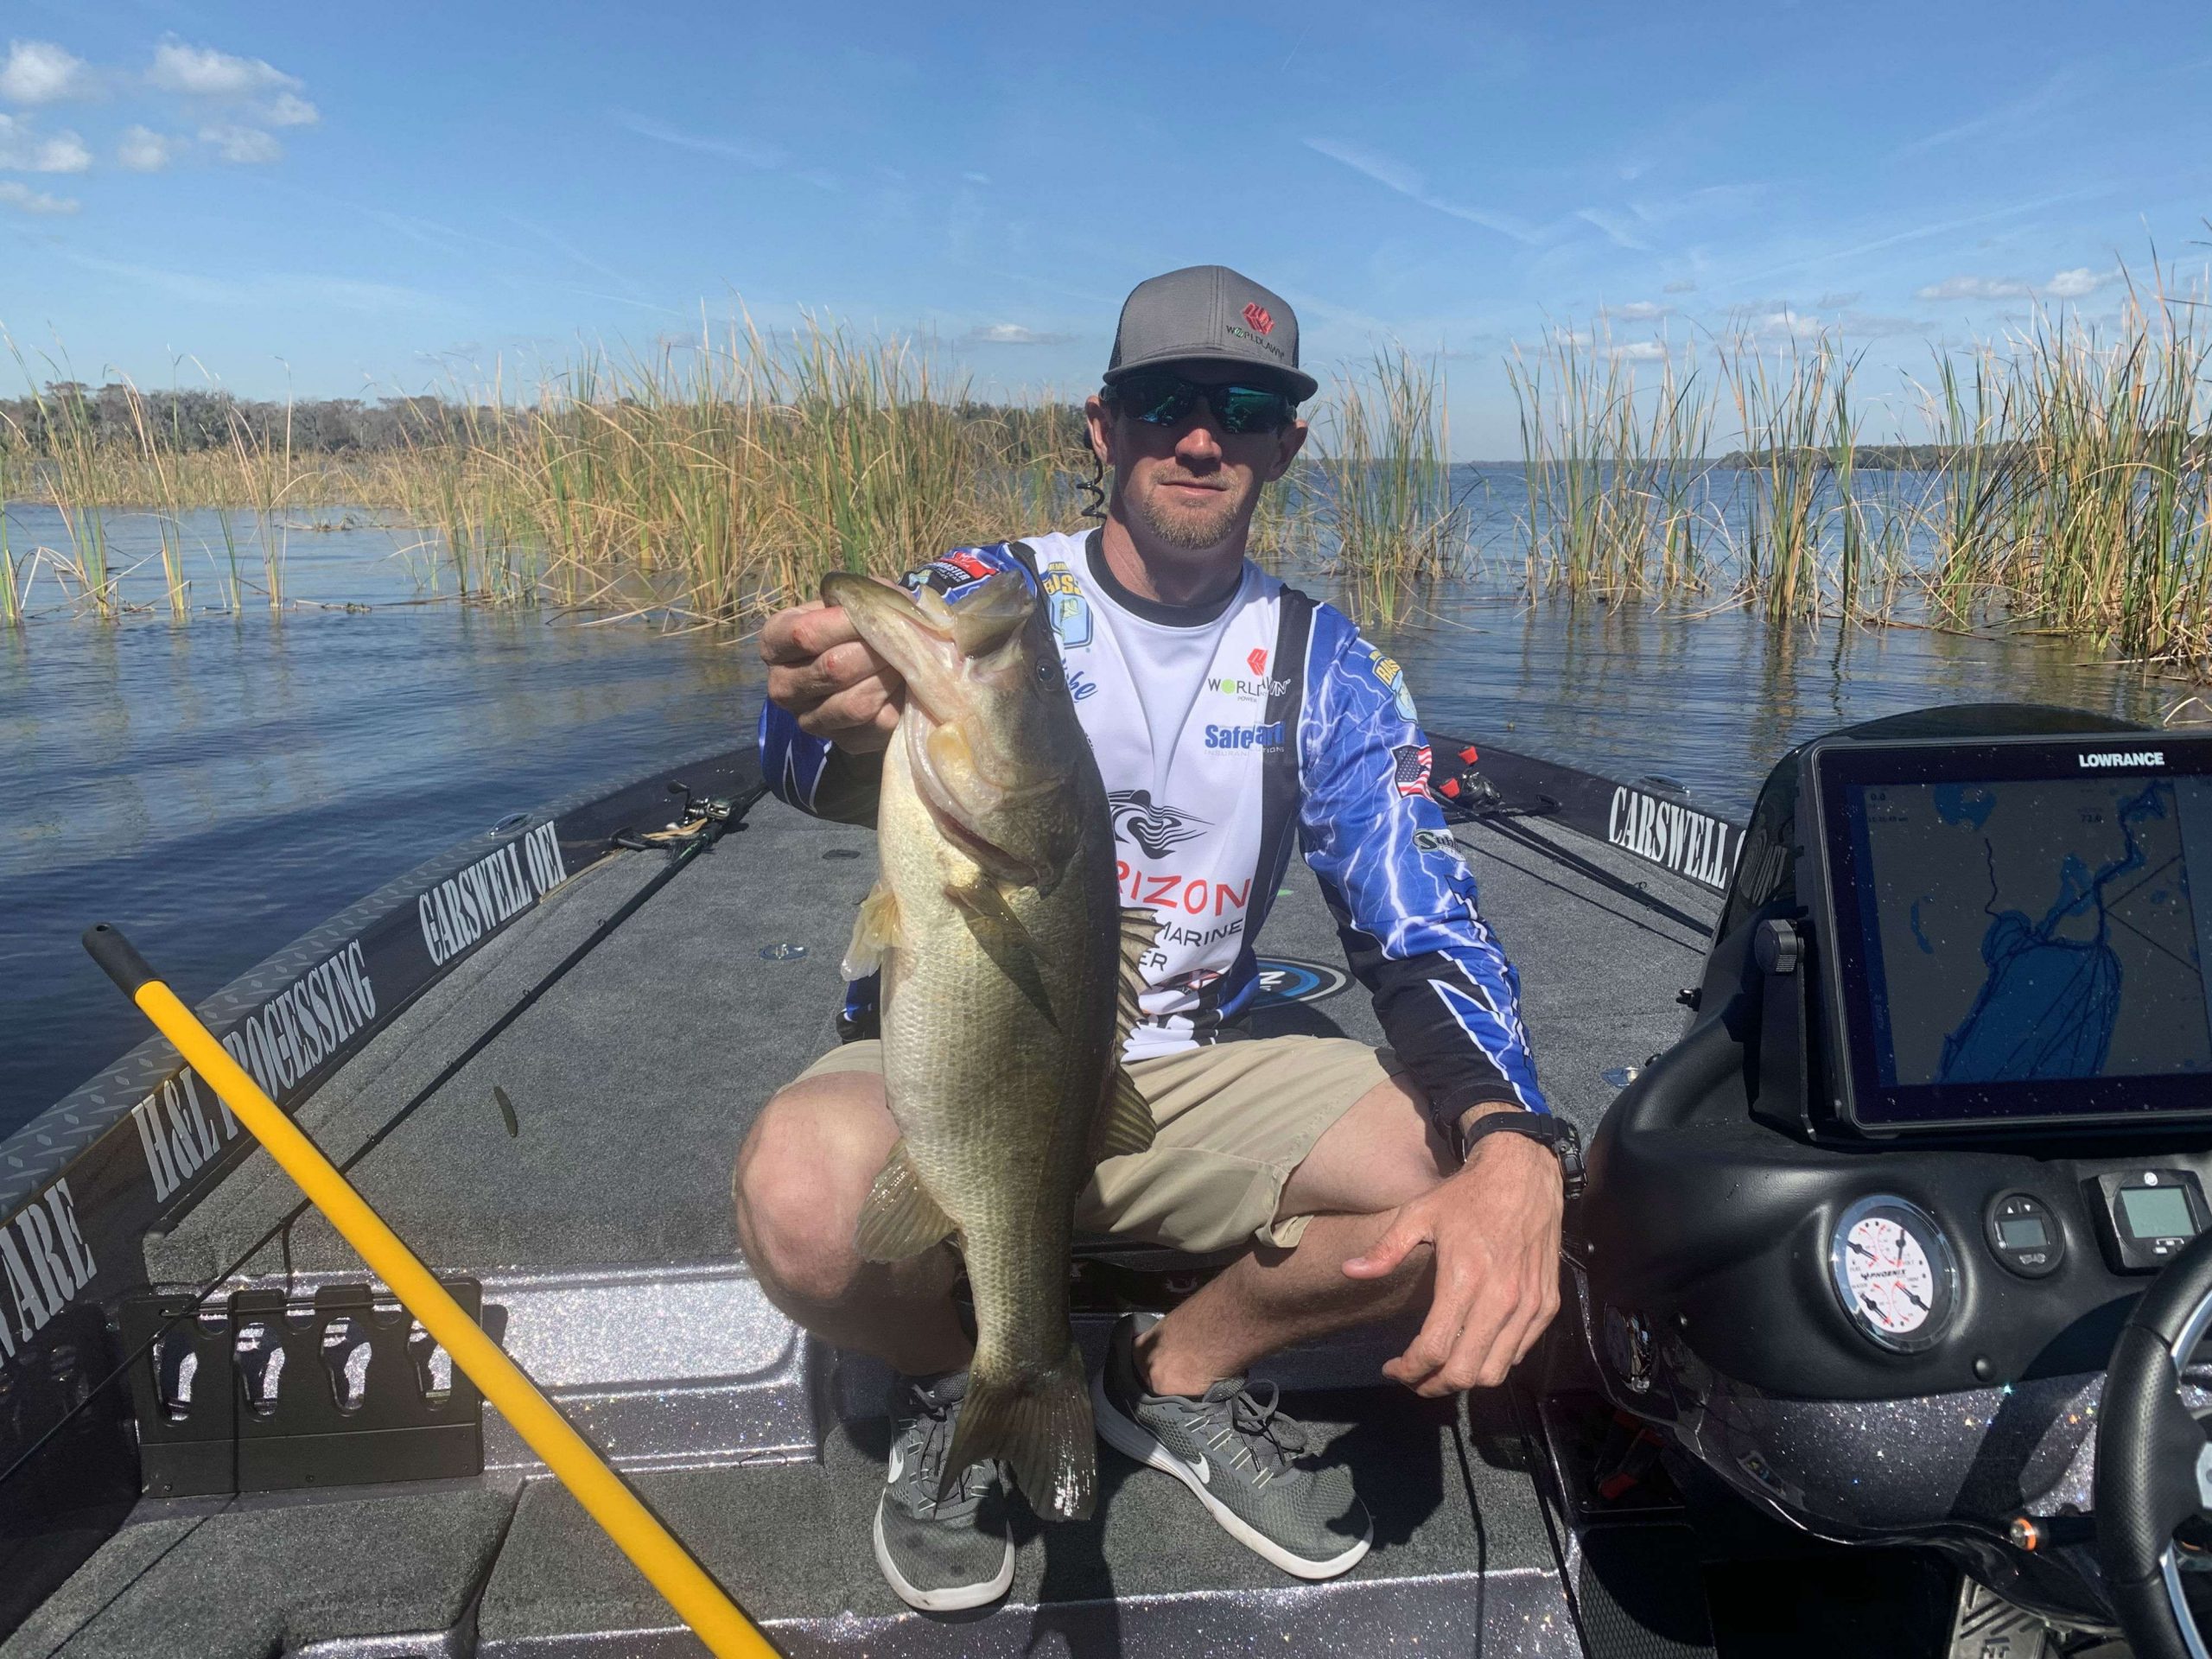 Luke Palmer just set the hook on another solid fish to cull up another couple pounds. BASSTrakk has him at around 16 1/2lbs. Iâd say he has closer to 18 though. Regardless, heâs doing exactly what he needs to do to make the weekend cut, and heâs still got plenty of time to do some upgrading.